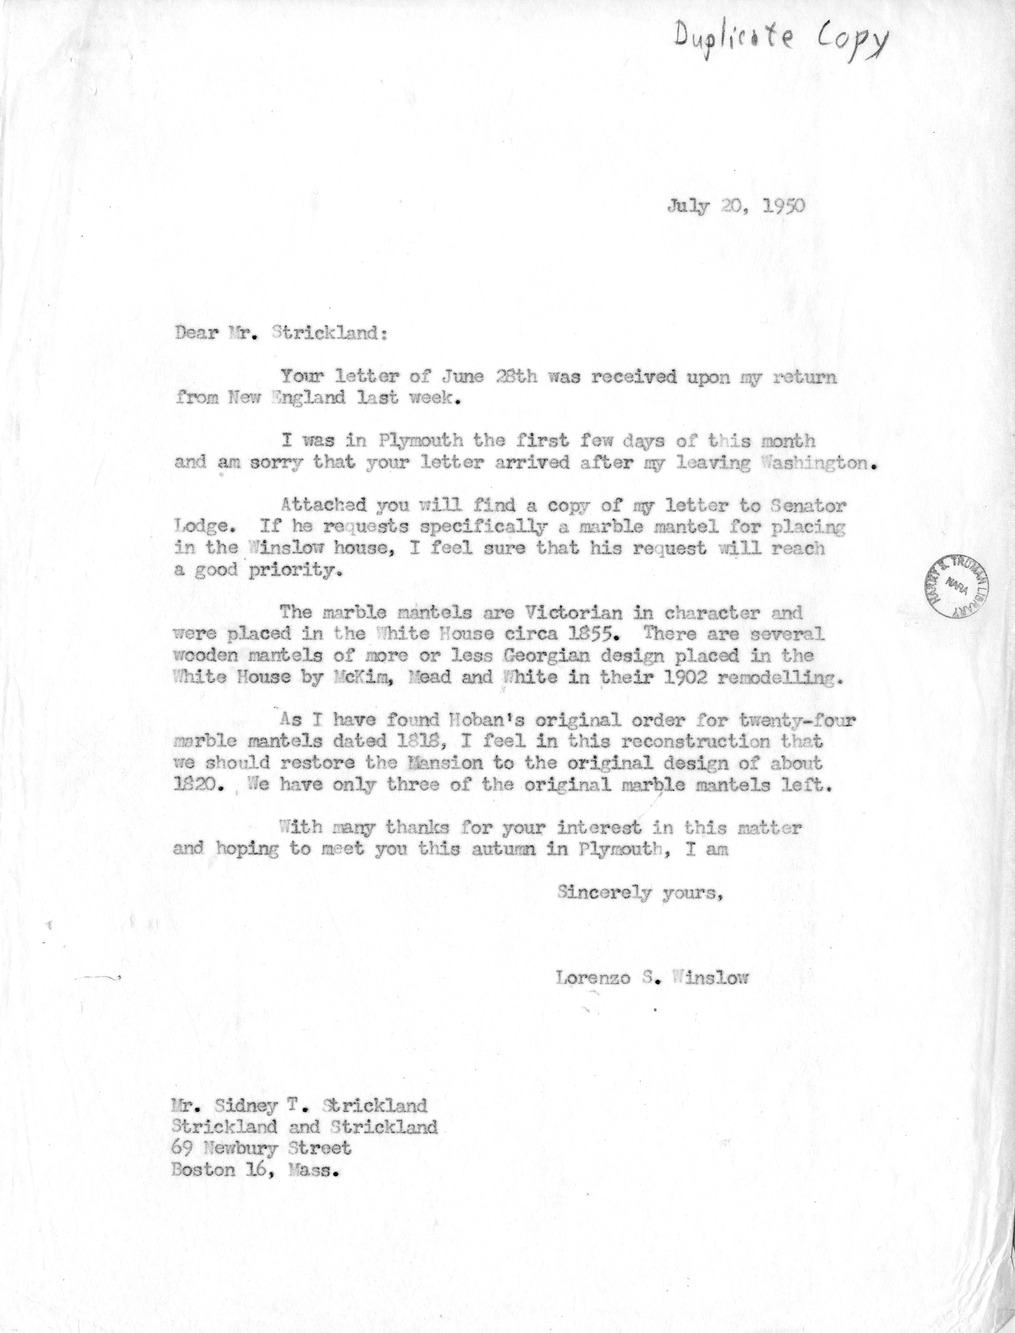 Letter from Lorenzo Winslow to Mr. Sidney T. Strickland